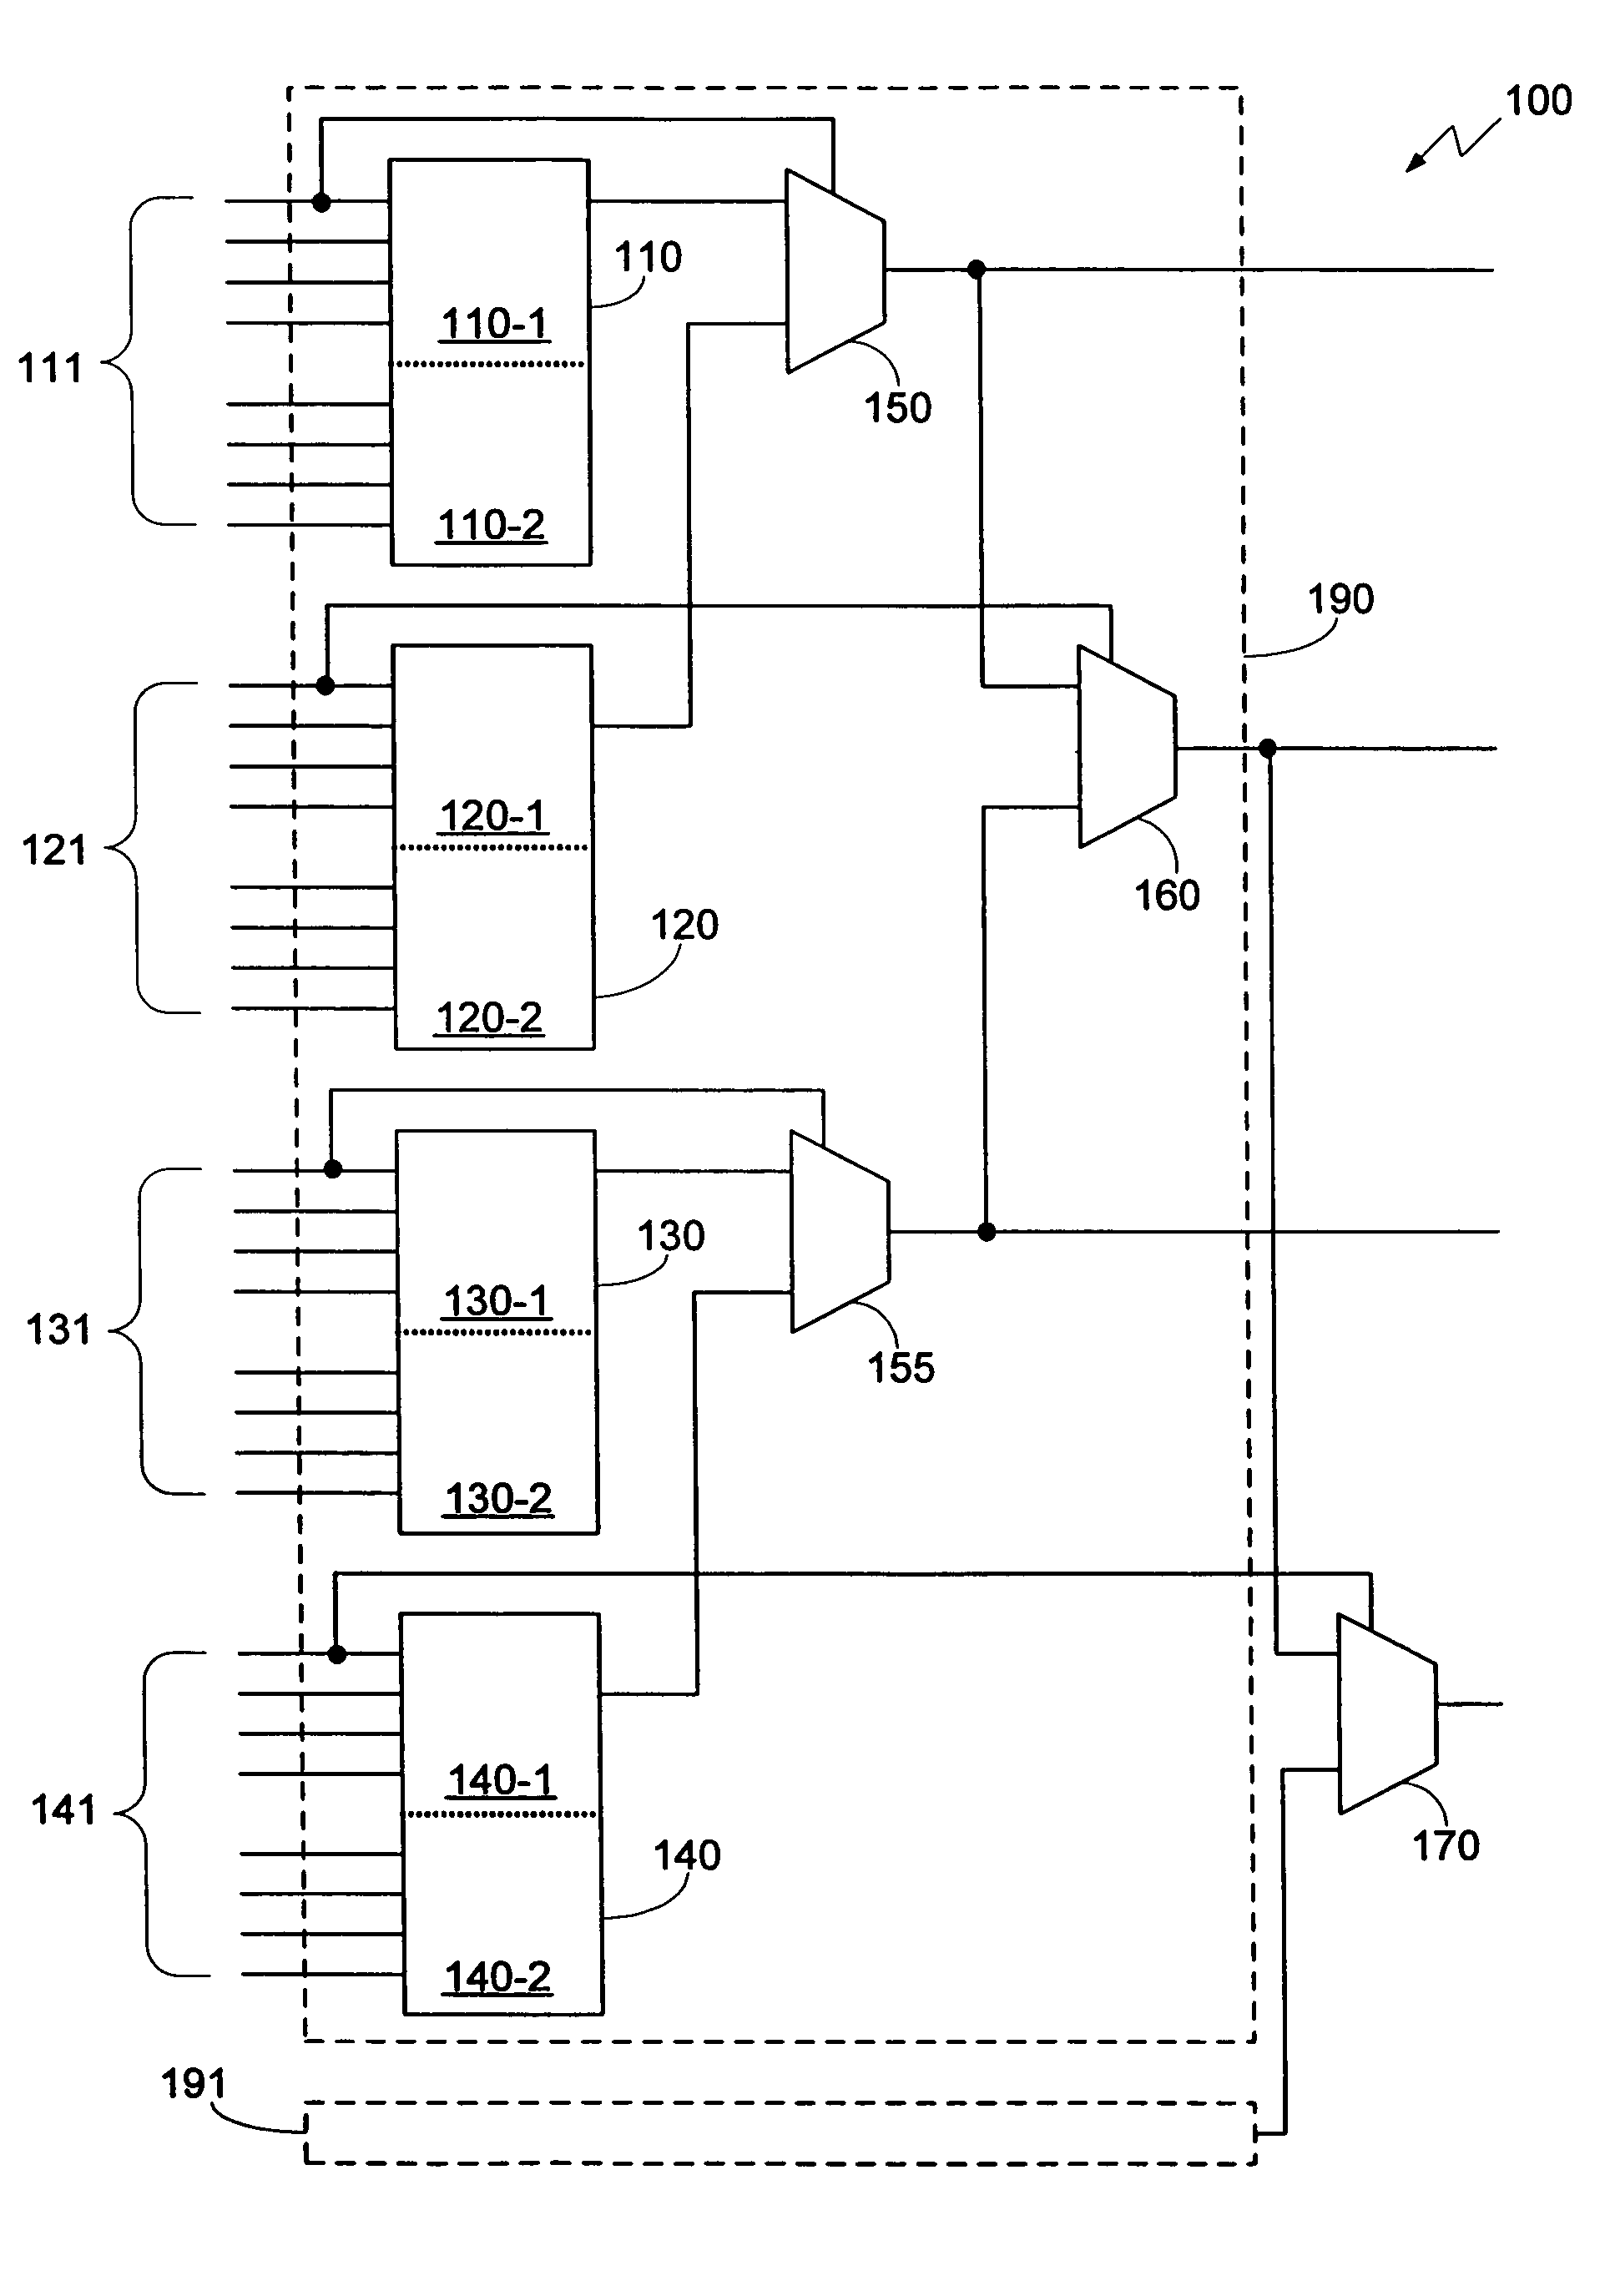 Logic cell with improved multiplexer, barrel shifter, and crossbarring efficiency